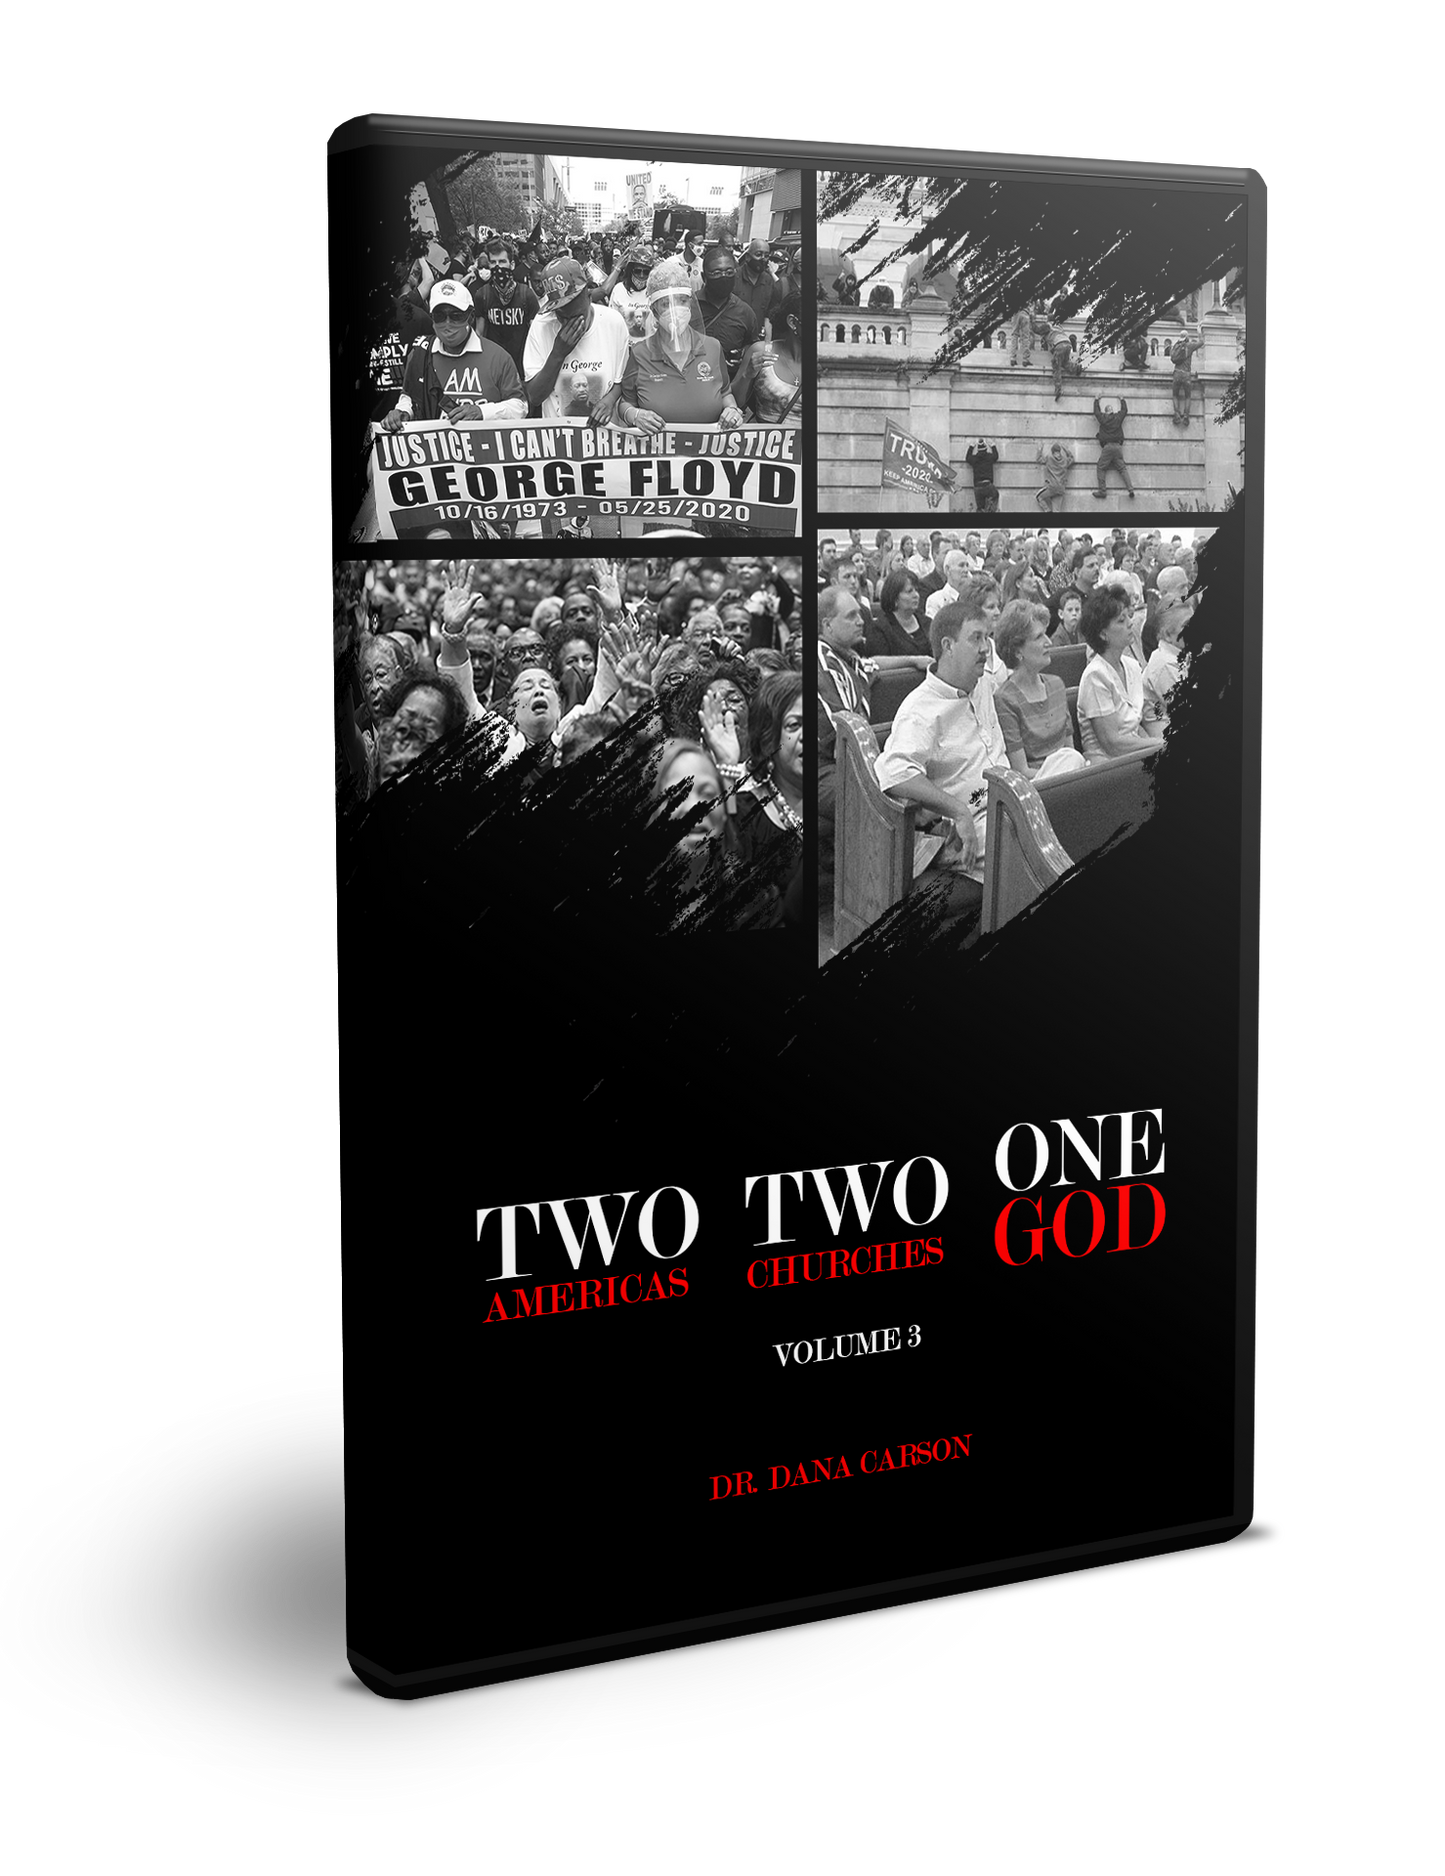 Two Churches, Two Americas, One God Volume 3 Series